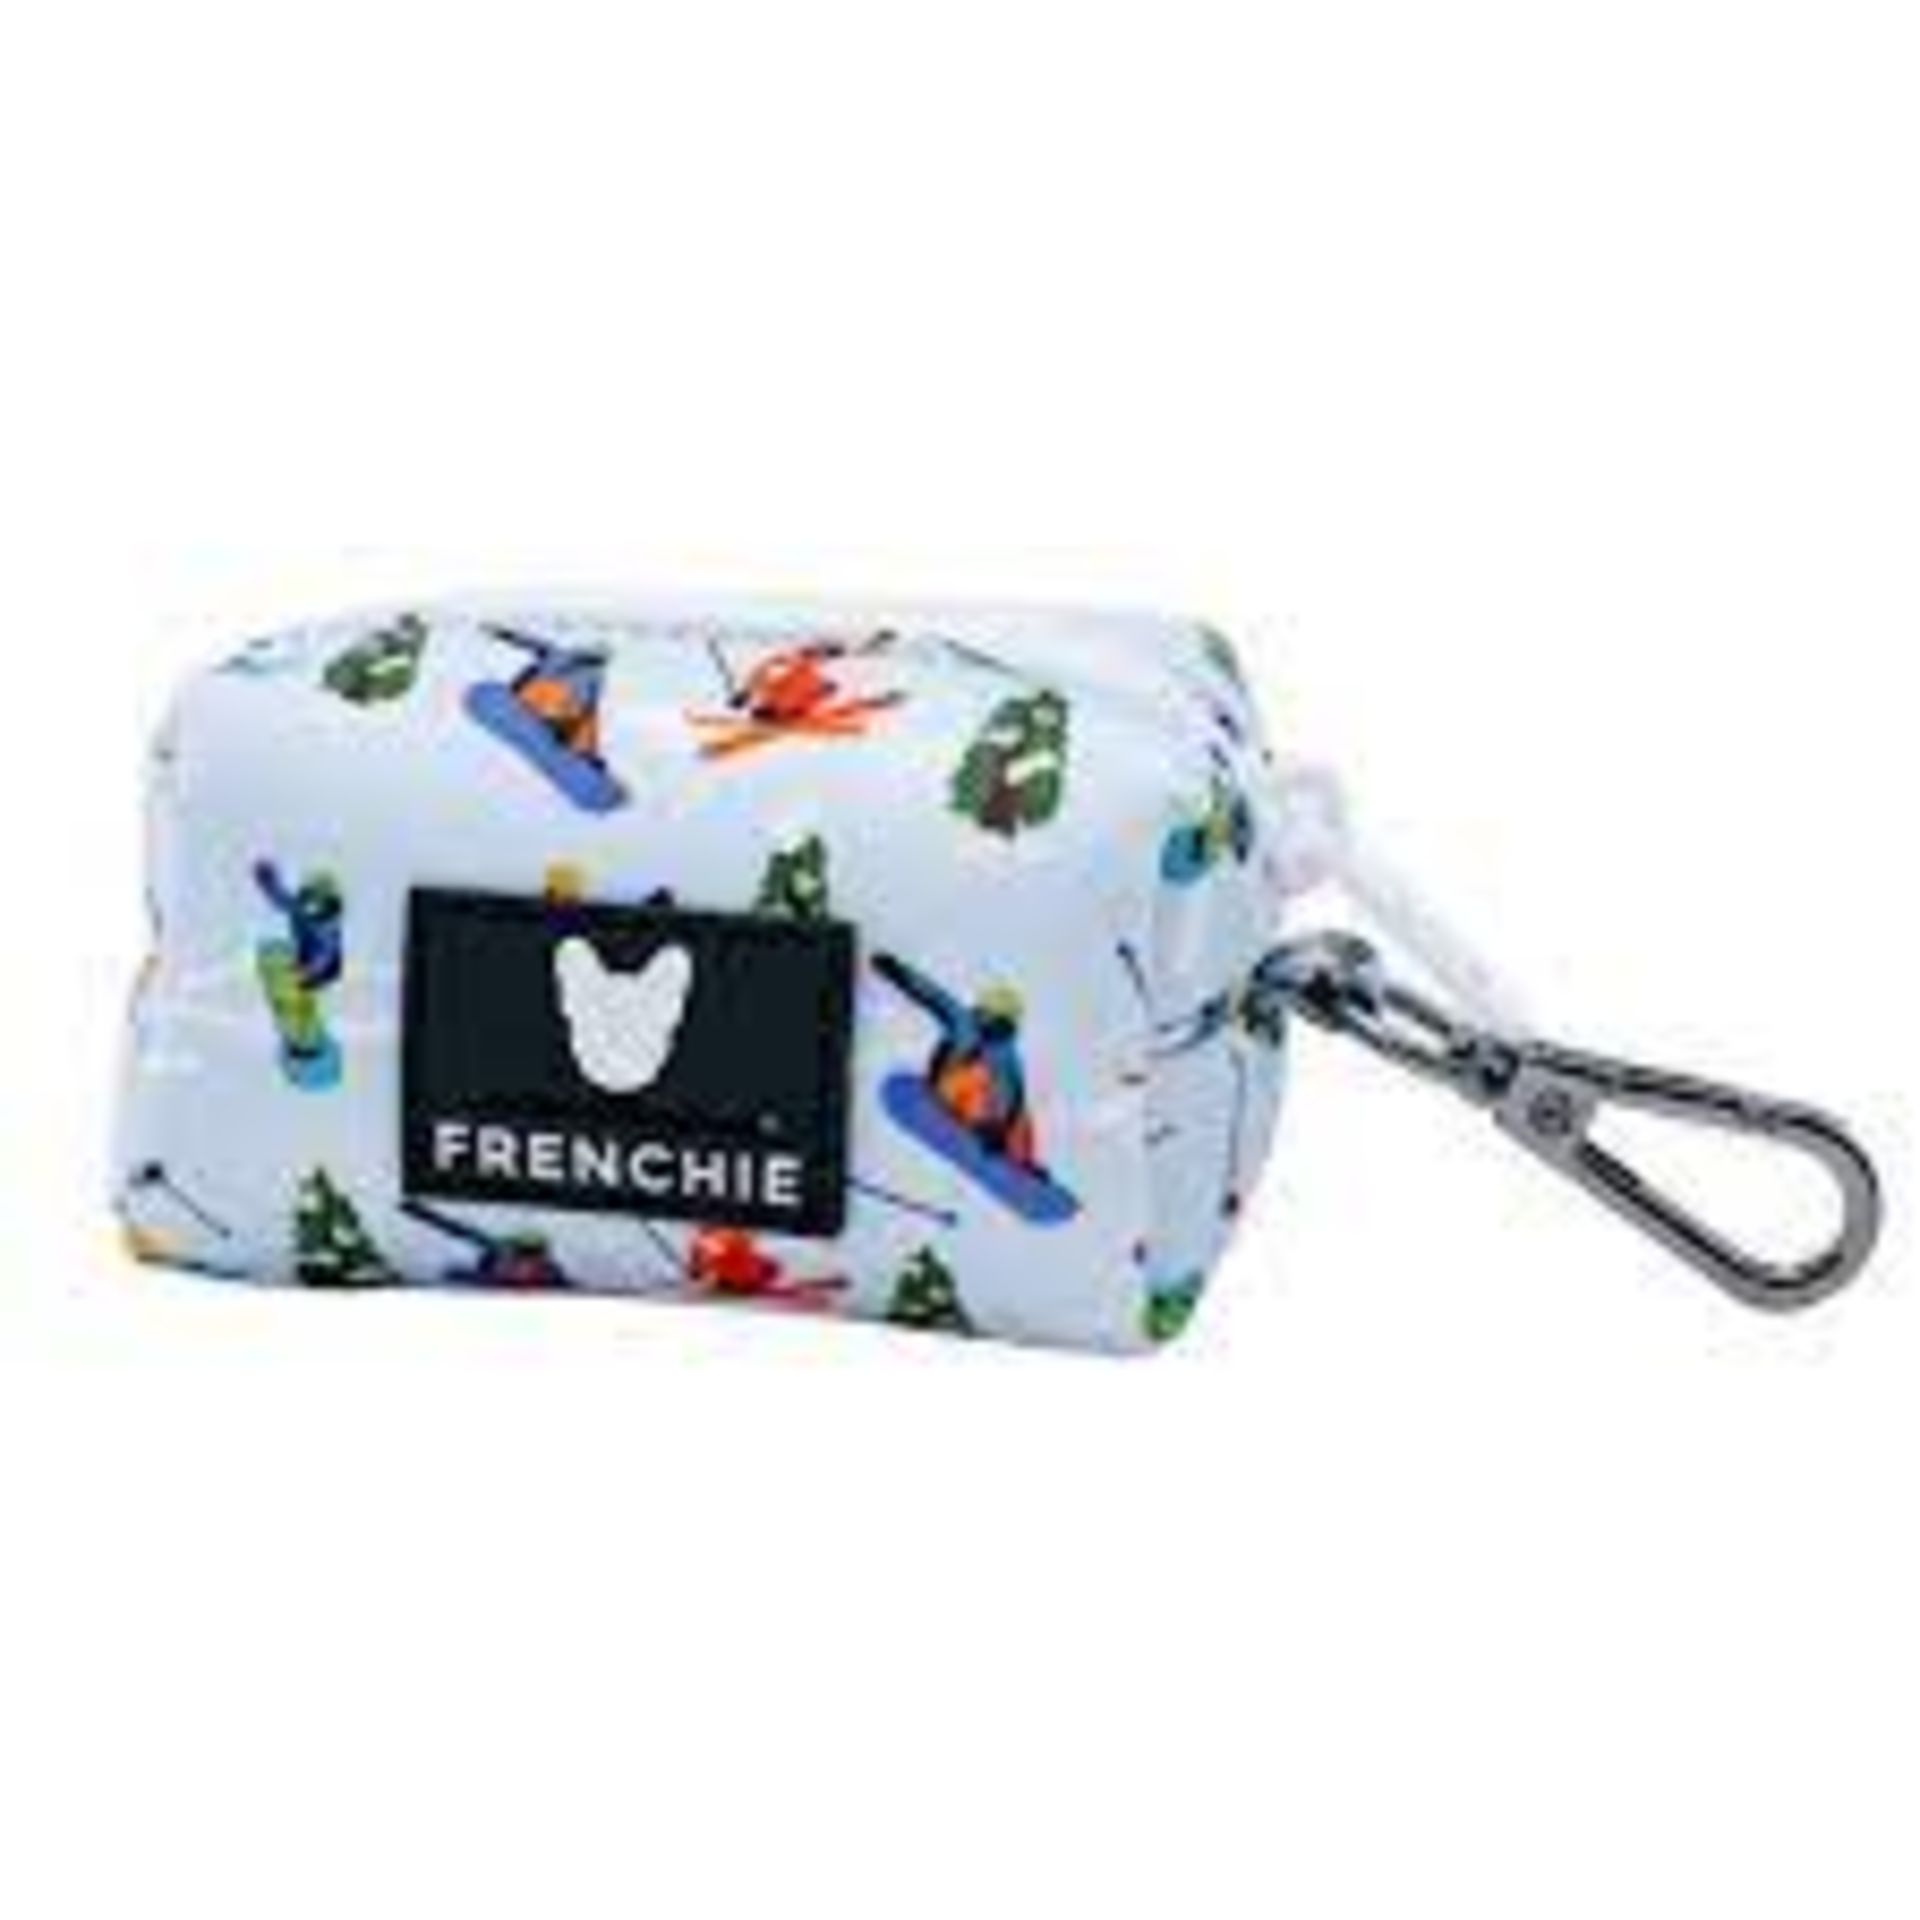 Trade Lot 100 X New .Packaged Frenchie The Bulldog Luxury Branded Dog Products. May include items - Image 34 of 50